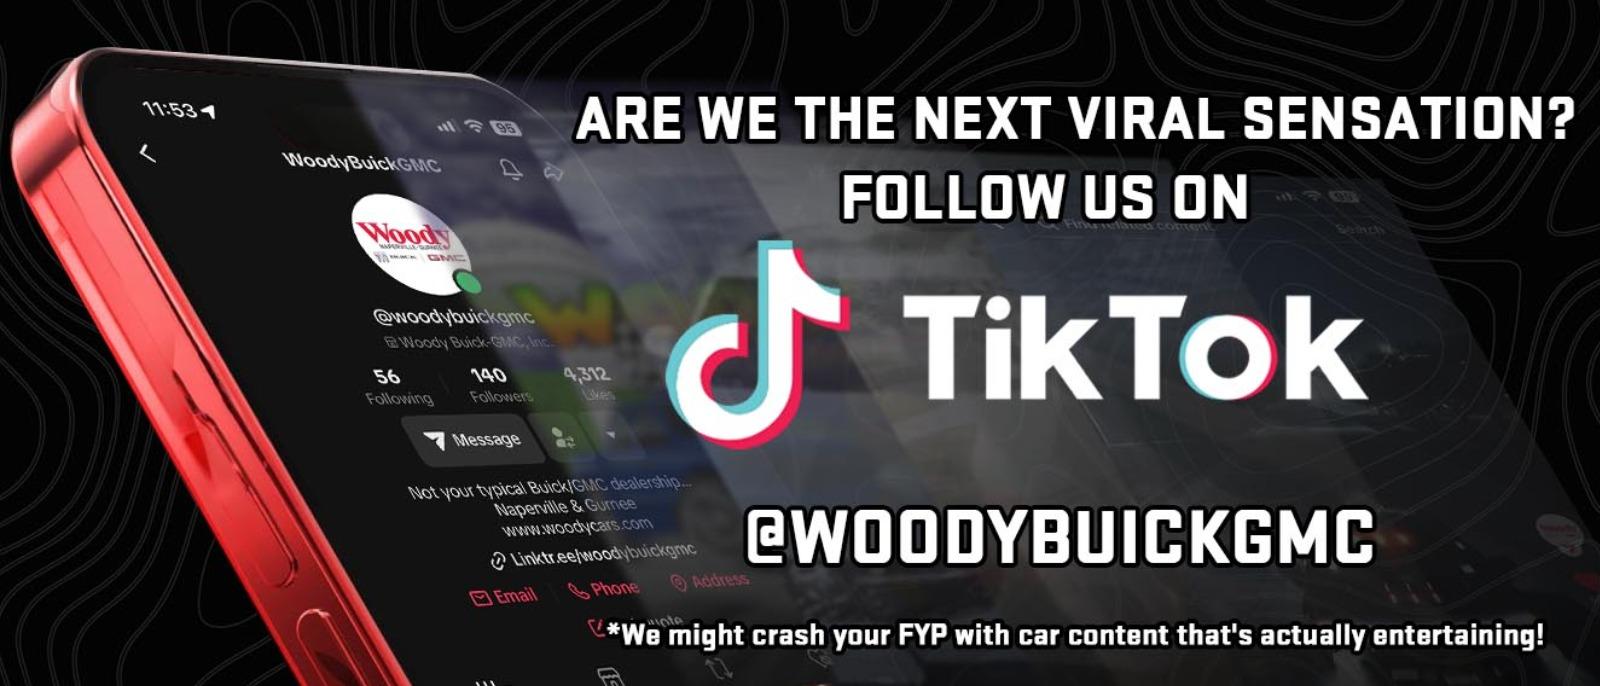 ARE WE THE NEXT VIRAL SENSATION? FOLLOW US ON TikTok @WOODYBUICKGMC *We might crash your FYP with car content that's actually entertaining!